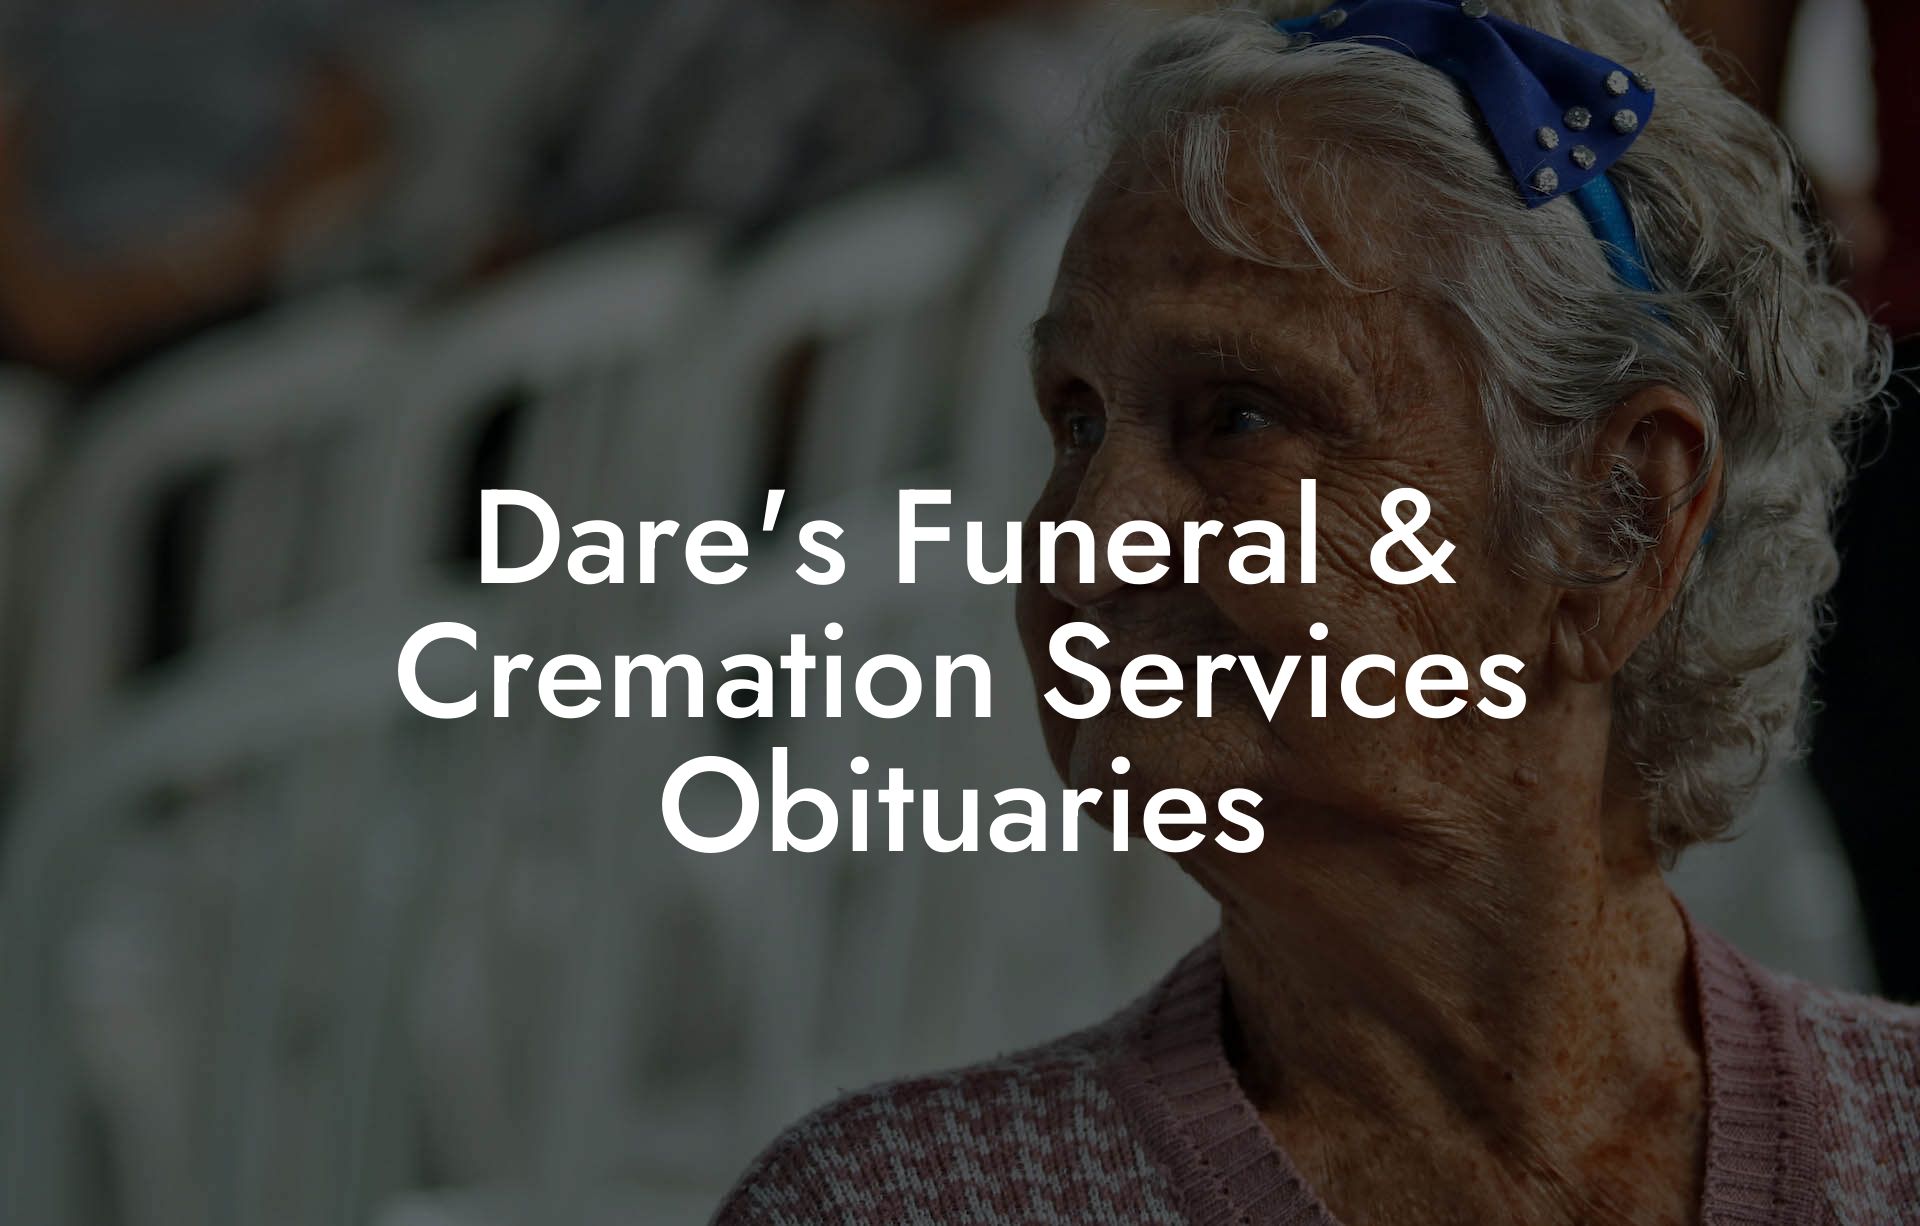 Dare's Funeral & Cremation Services Obituaries